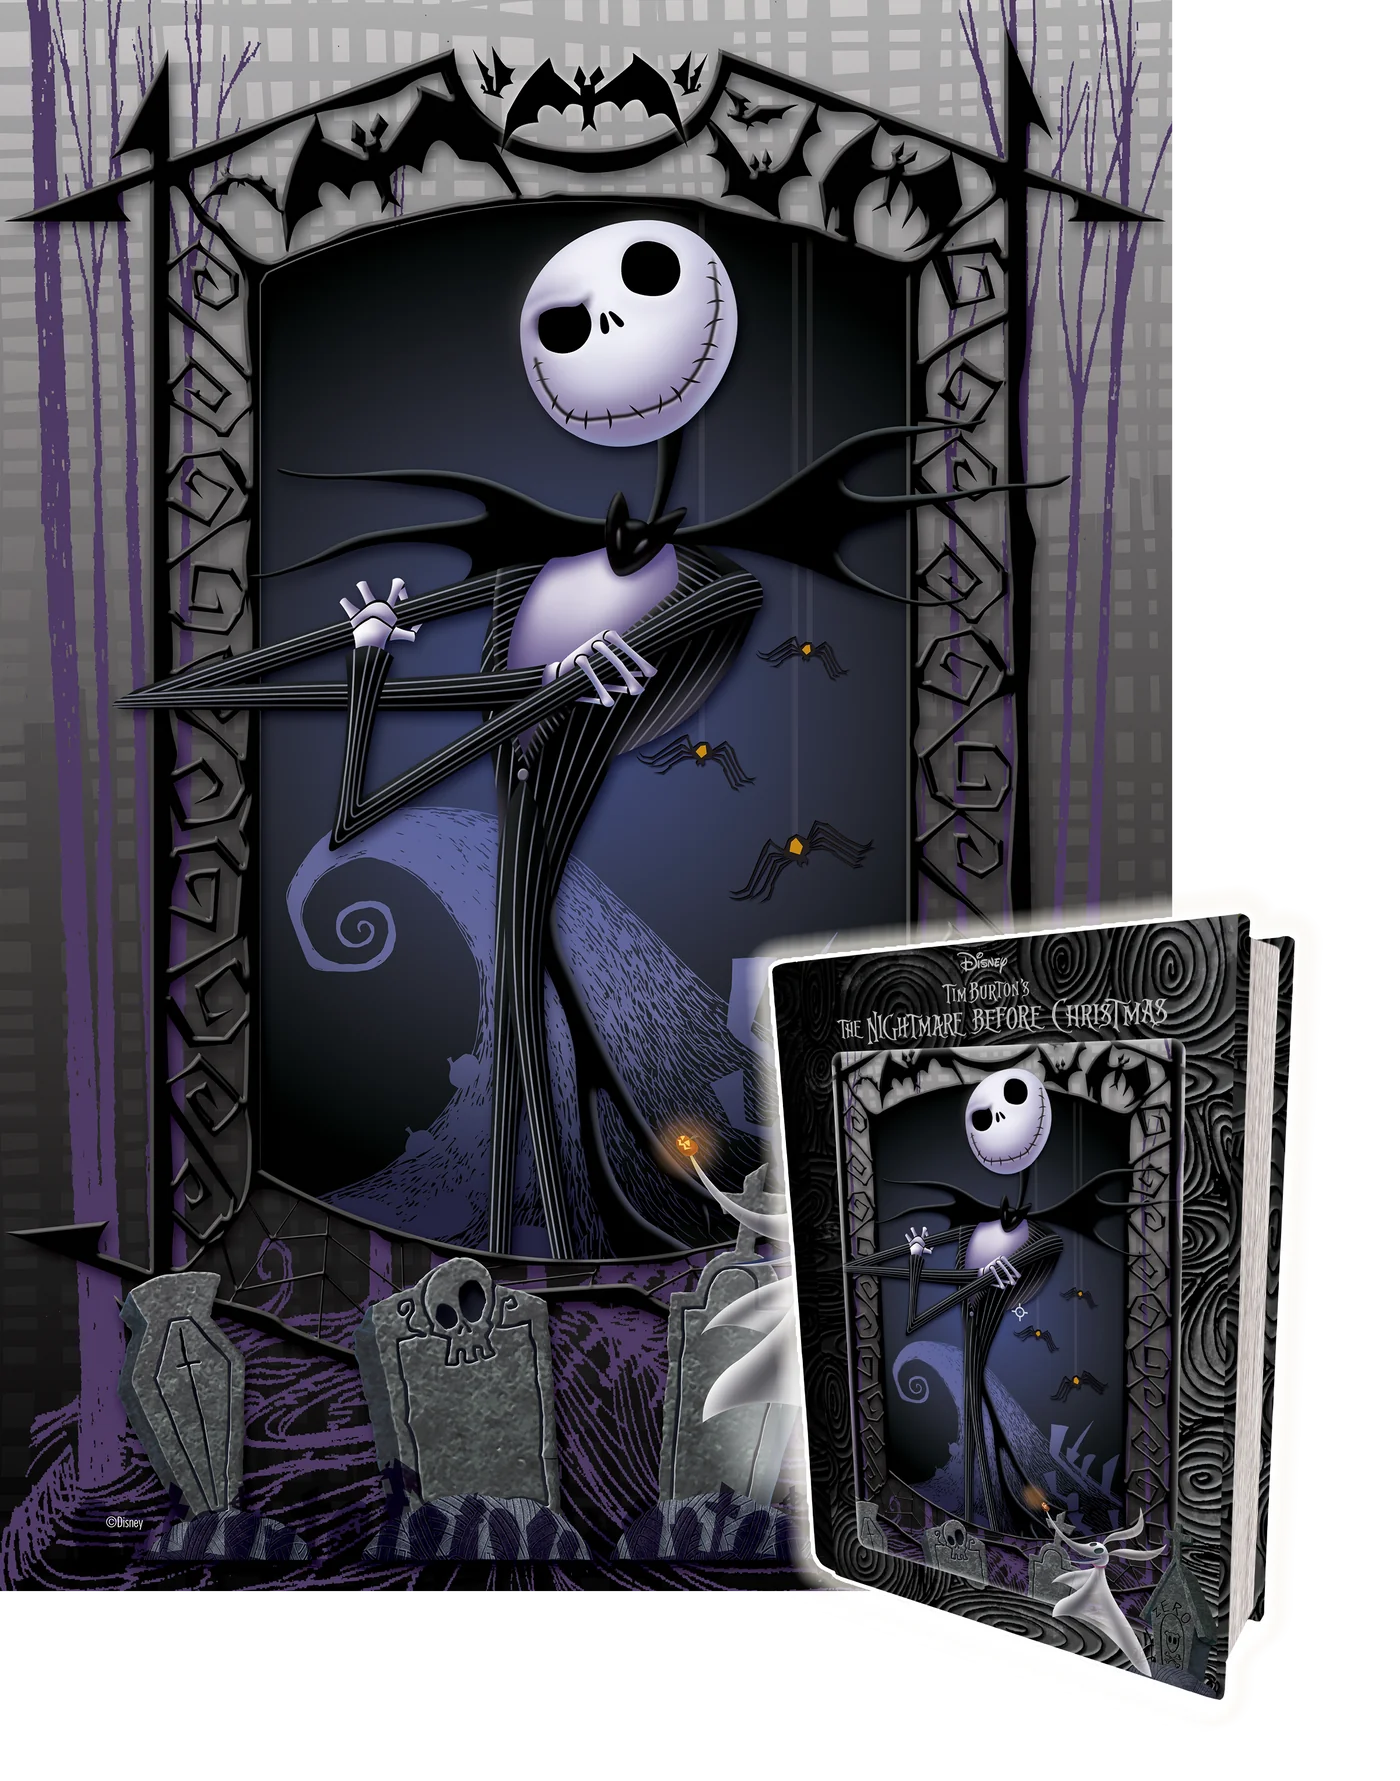 The Nightmare Before Christmas - Disney (Lenticular Jigsaw Puzzle, Tin Book)